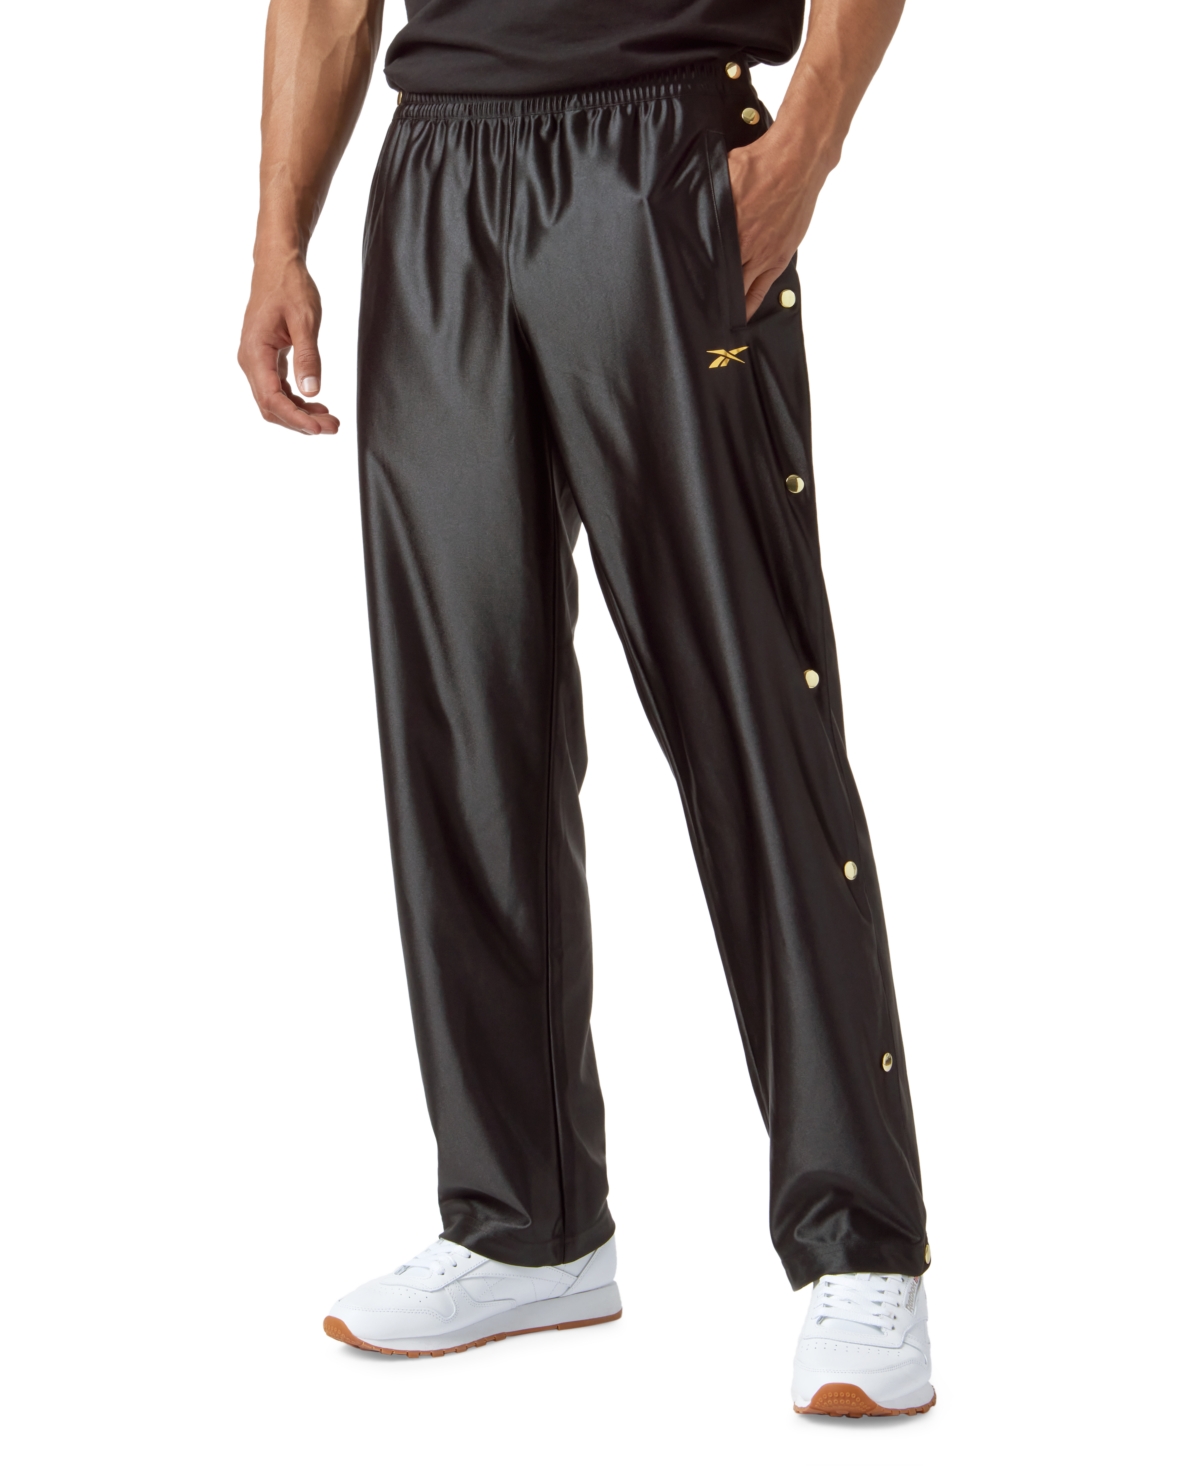 Men's Basketball Gold-Tone Snap Pants, Created for Macy's - Black